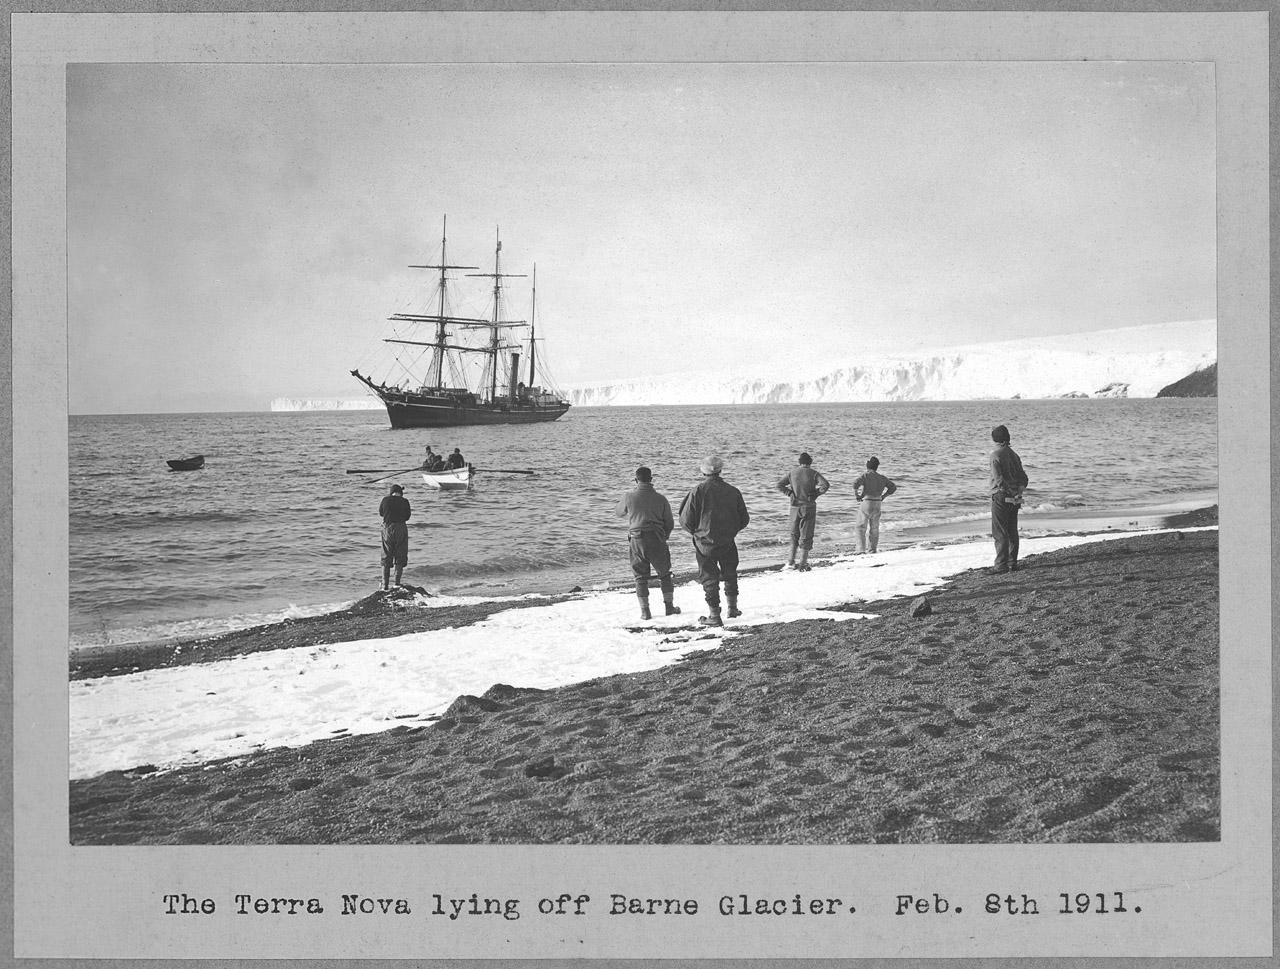 Image of the ship Terra Nova off the coat, with people standing on the shore looking out to sea